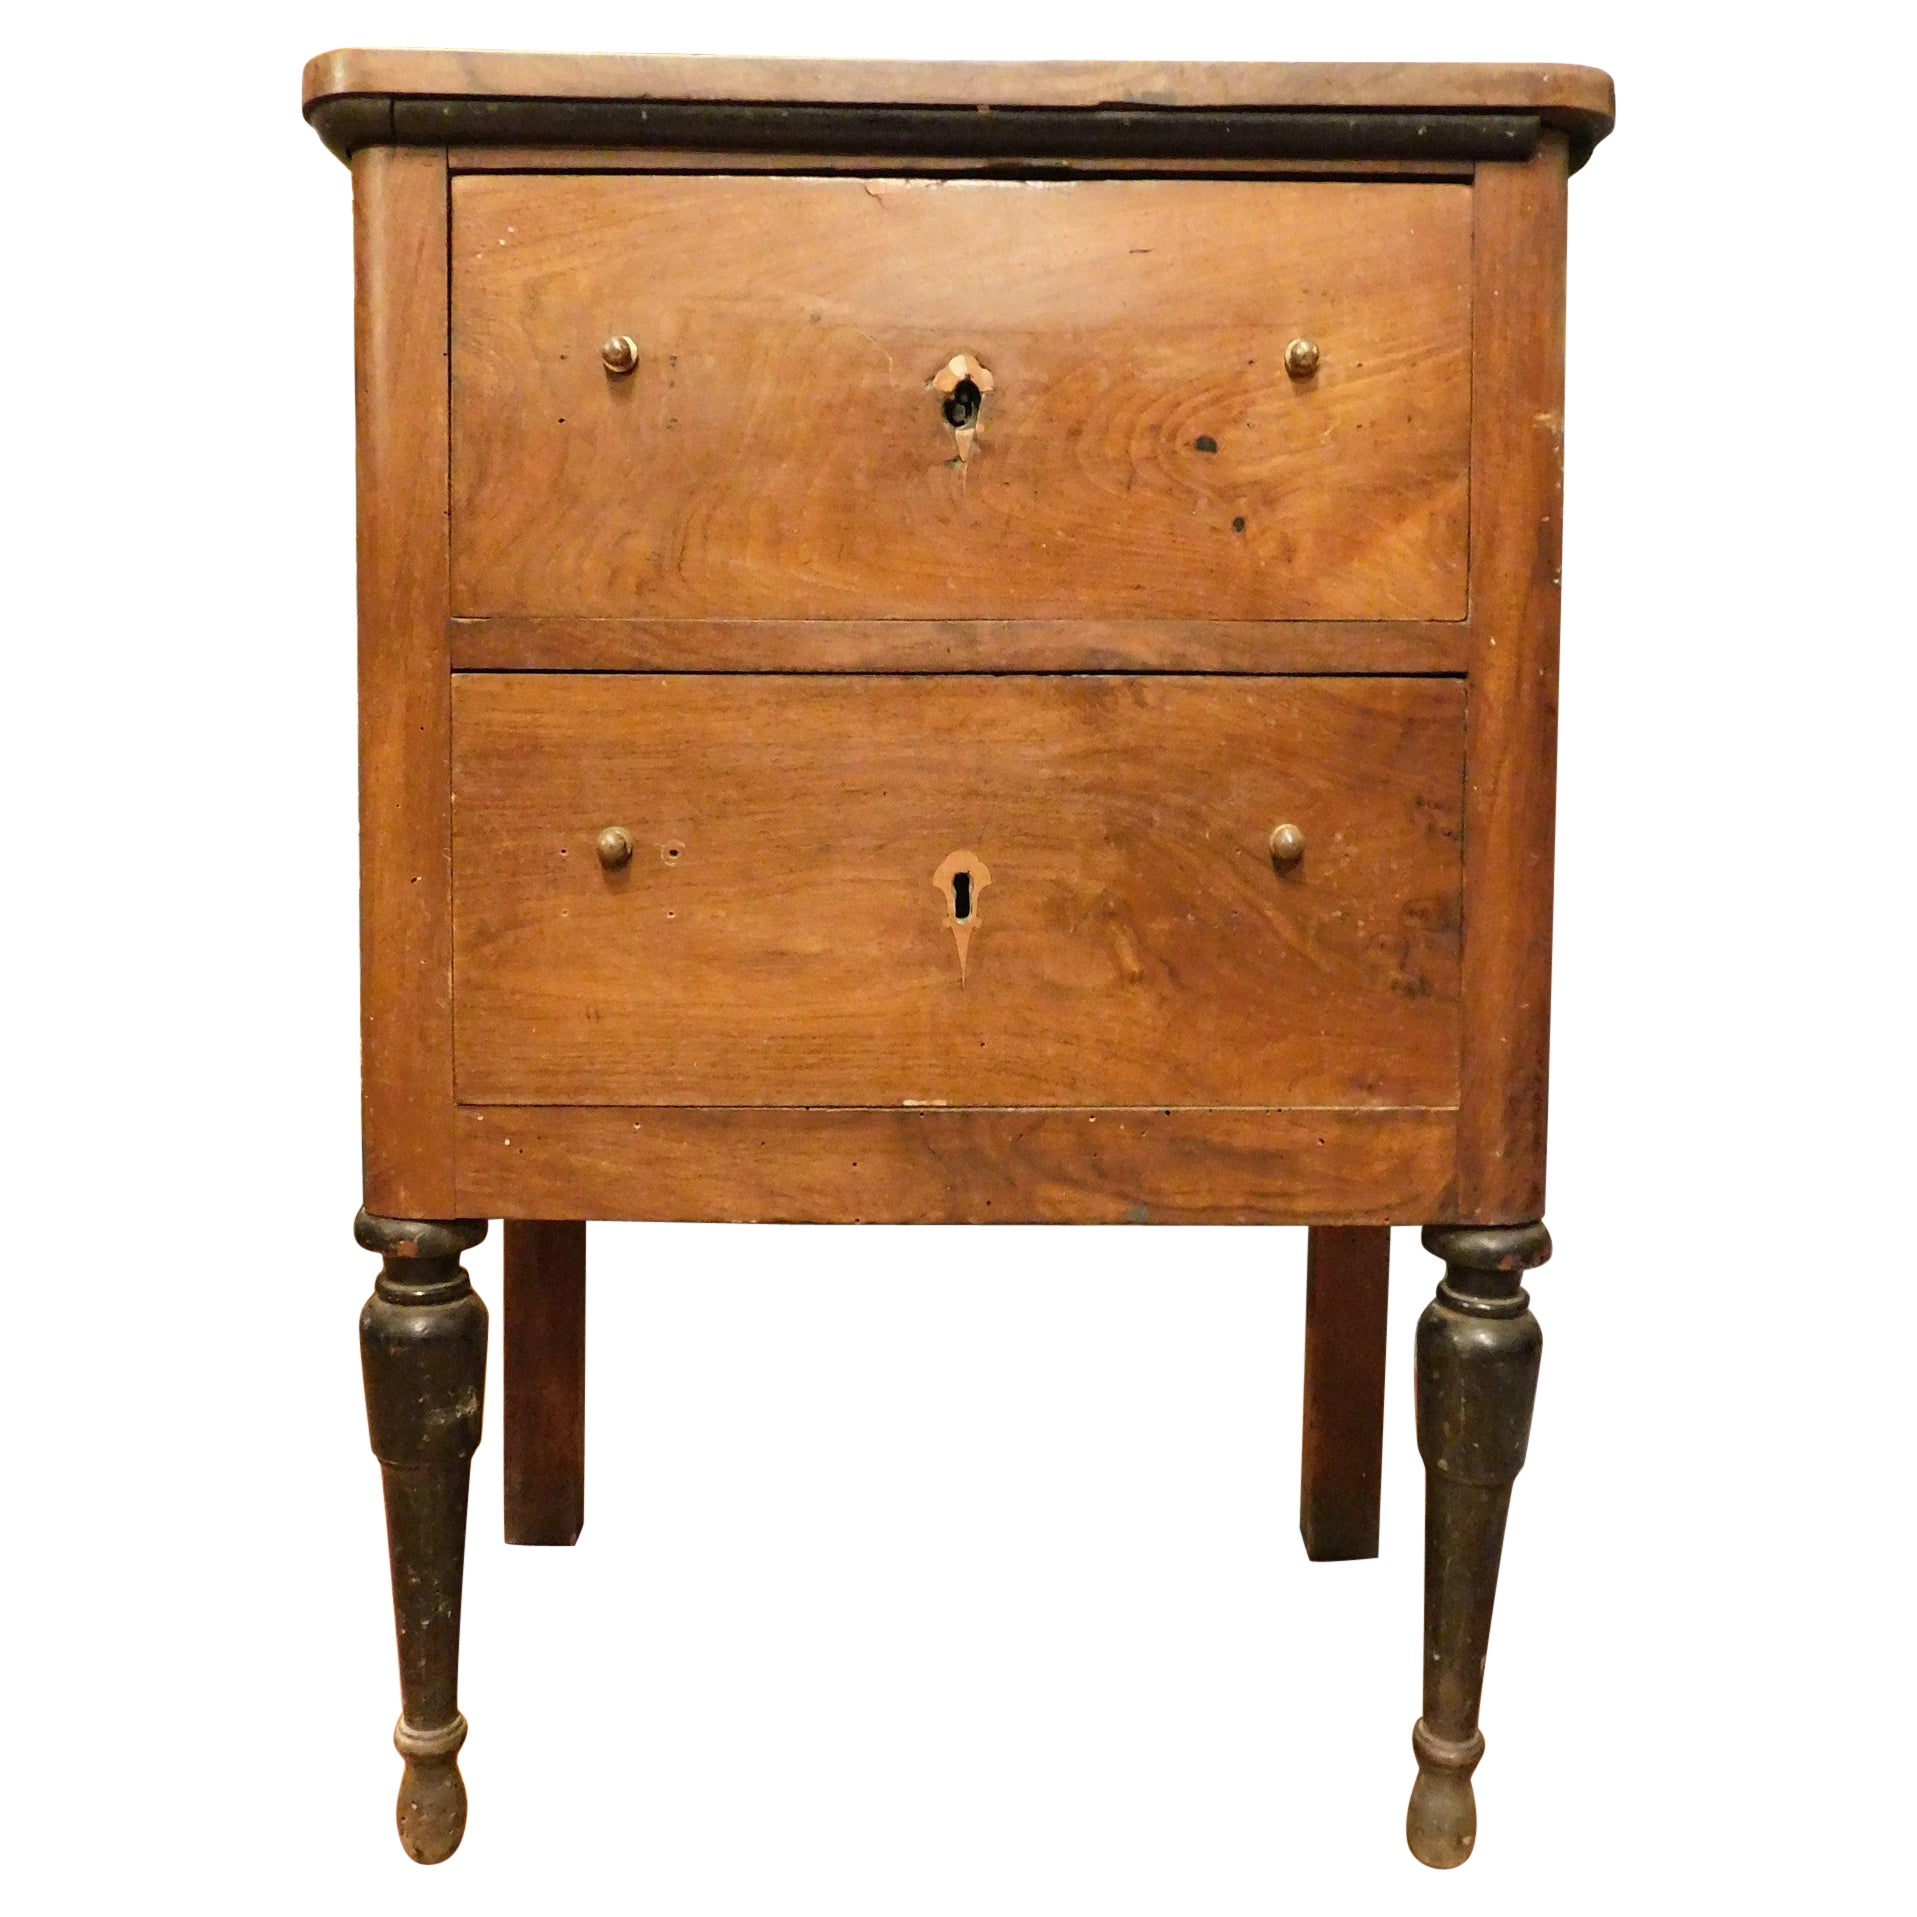 Ancient Wooden Bedside Tables, from 19th Century, Rome